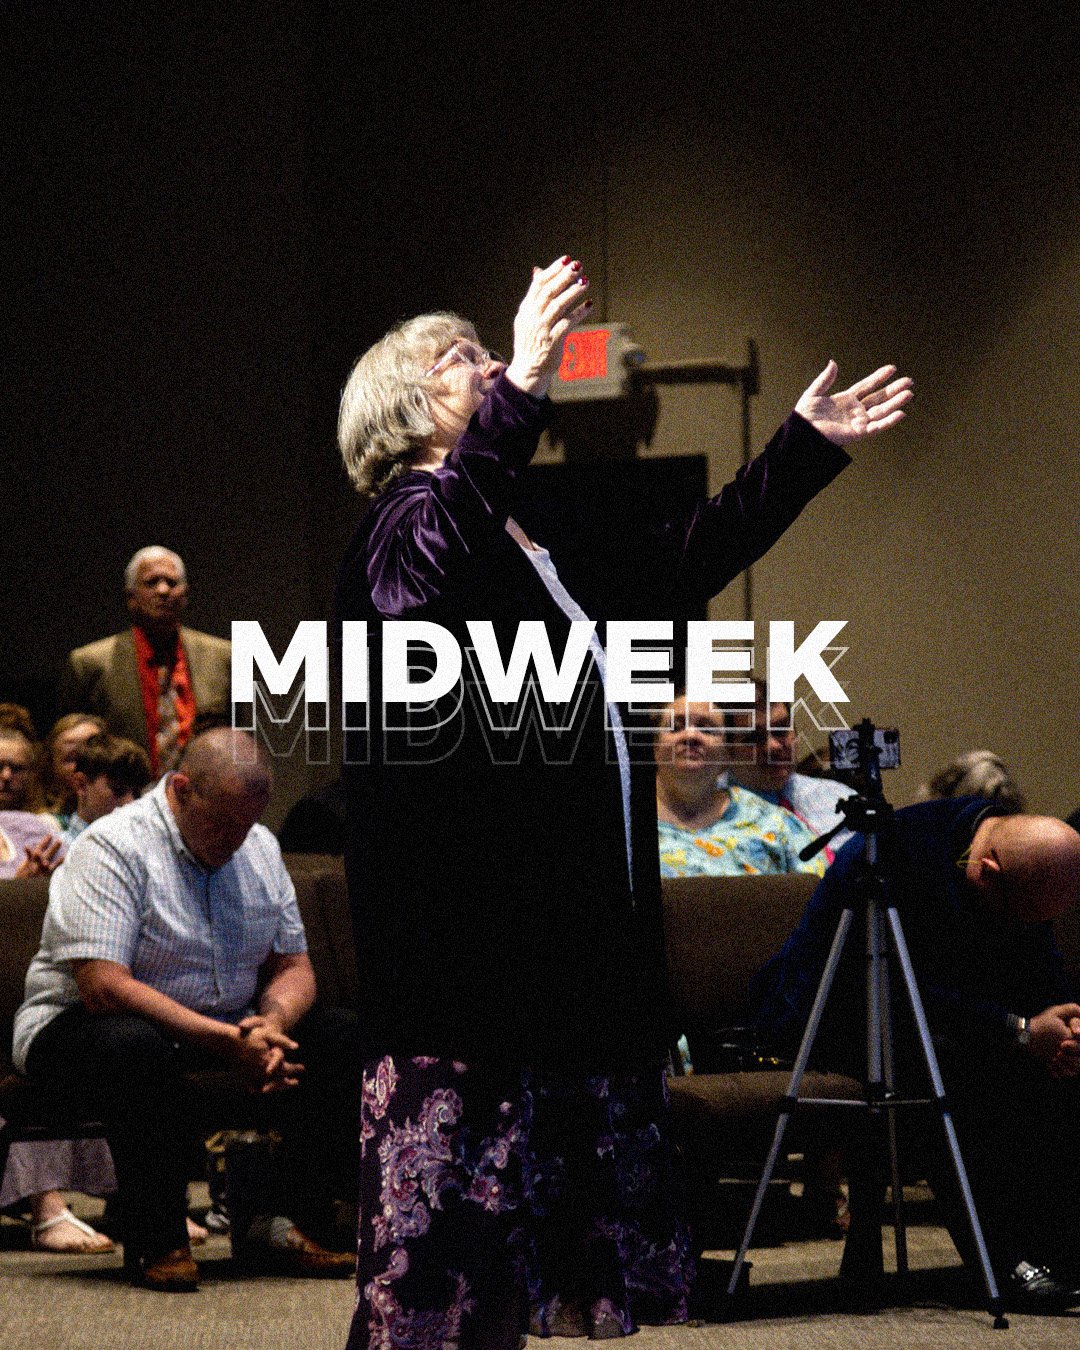 Come worship with us tonight at MIDWEEK at FPC!

#FPCAnderson #MidweekMatters